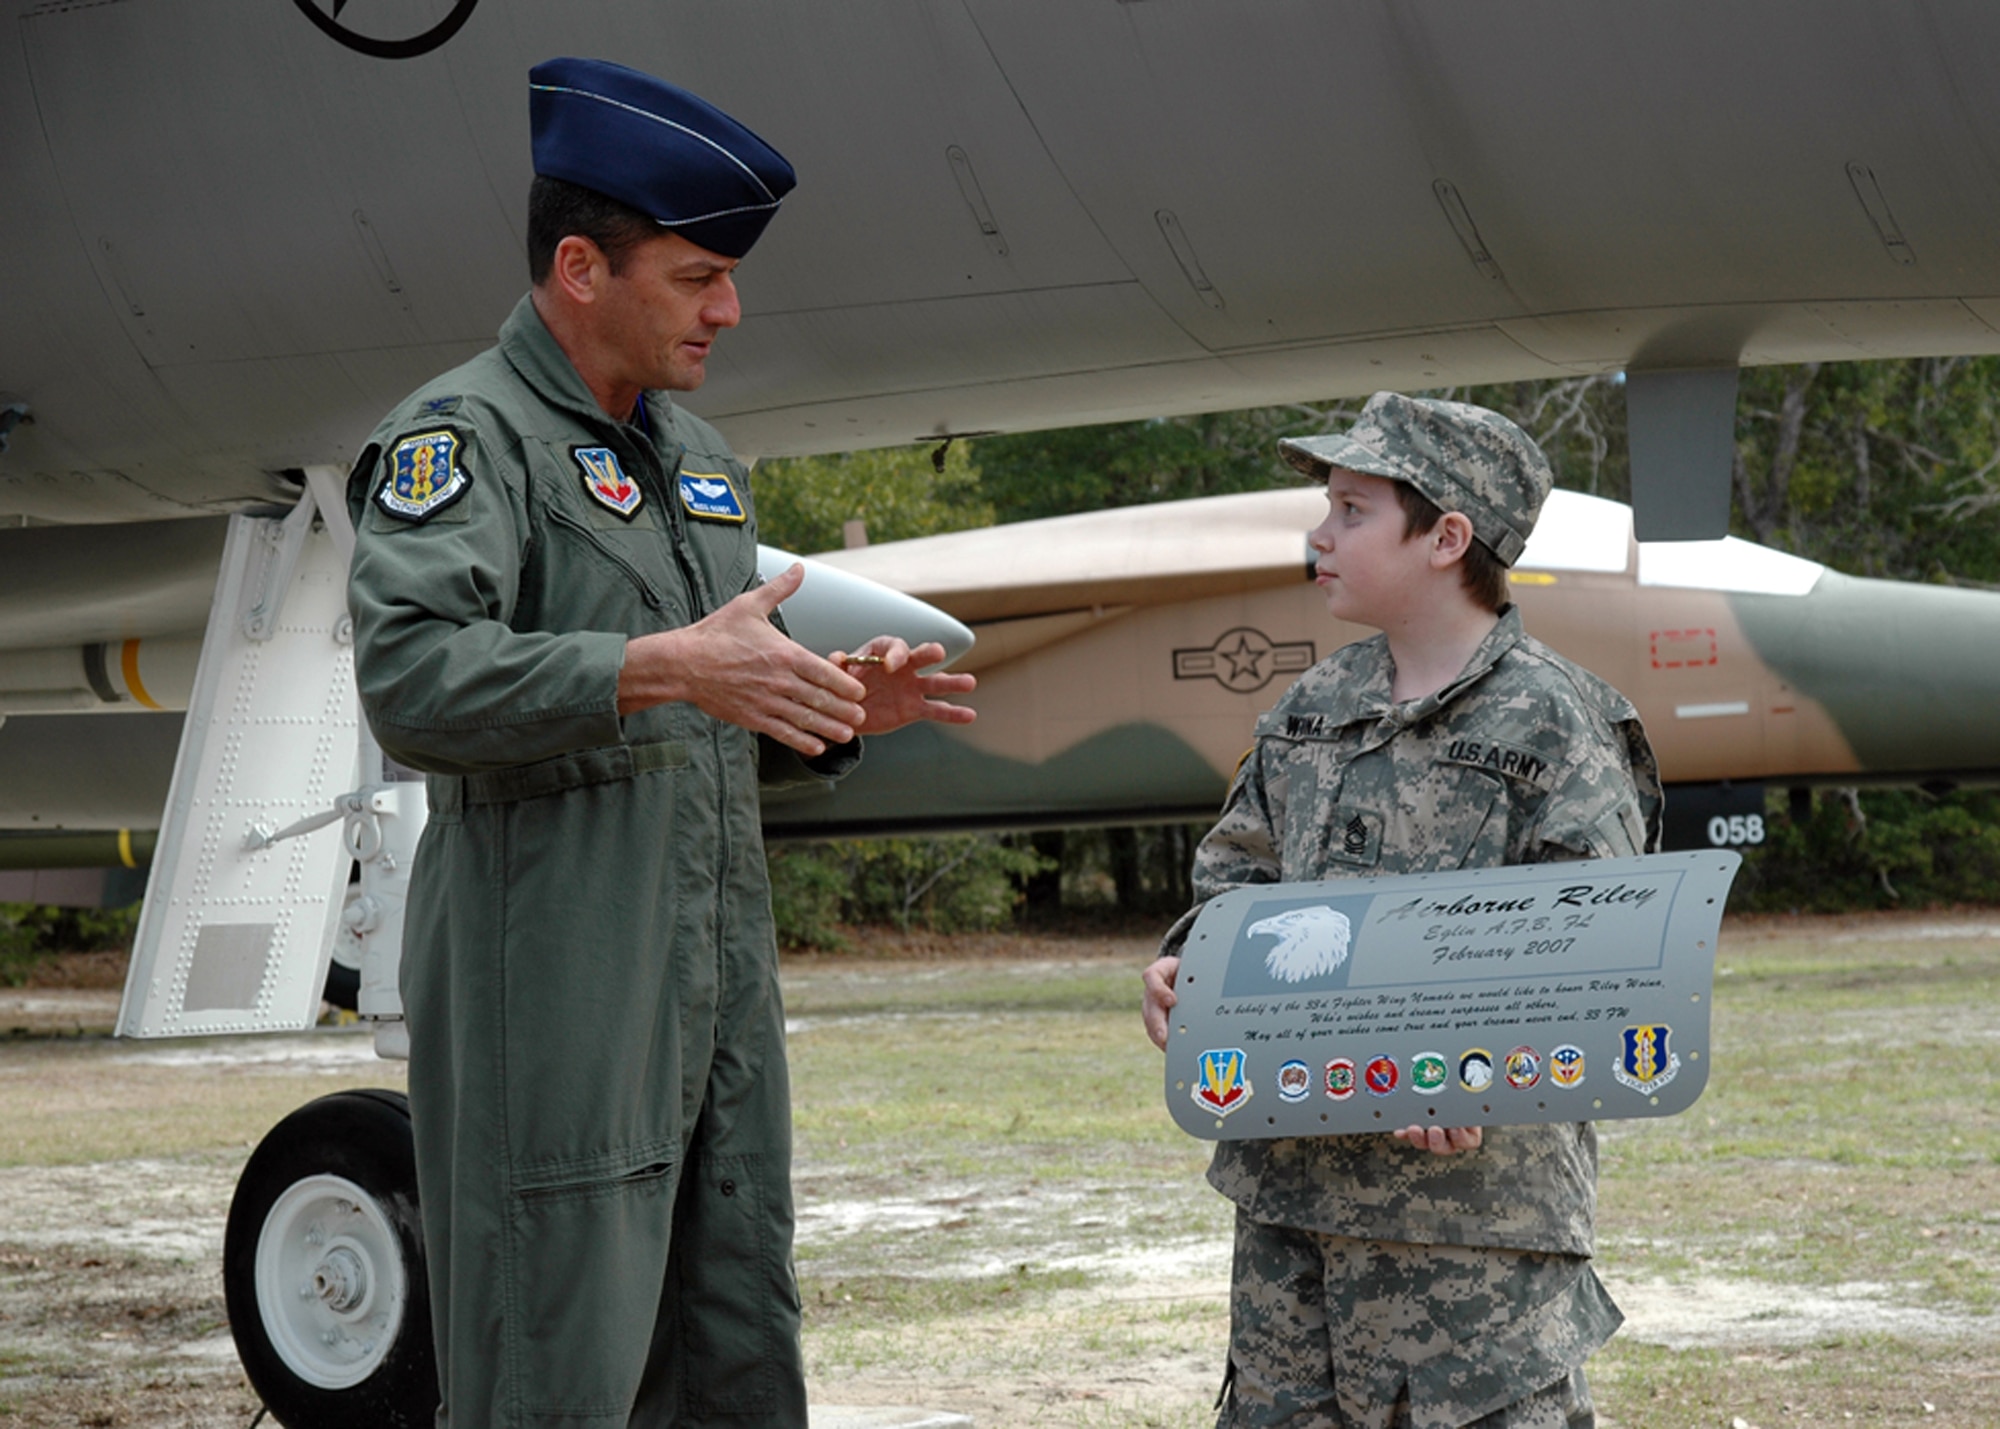 EGLIN AIR FORCE BASE, Fla. -- Col. Russ Handy, 33d Fighter Wing Commander, presents his commander?s coin to Riley Woina, 14, from Connecticut. Riley, diagnosed with cystic fibrosis, was granted a week with the 6th Ranger Training Battalion and Eglin Airmen through the Make-A-Wish Foundation Feb. 19-24. (USAF photo by Staff Sgt. Bryan Franks)